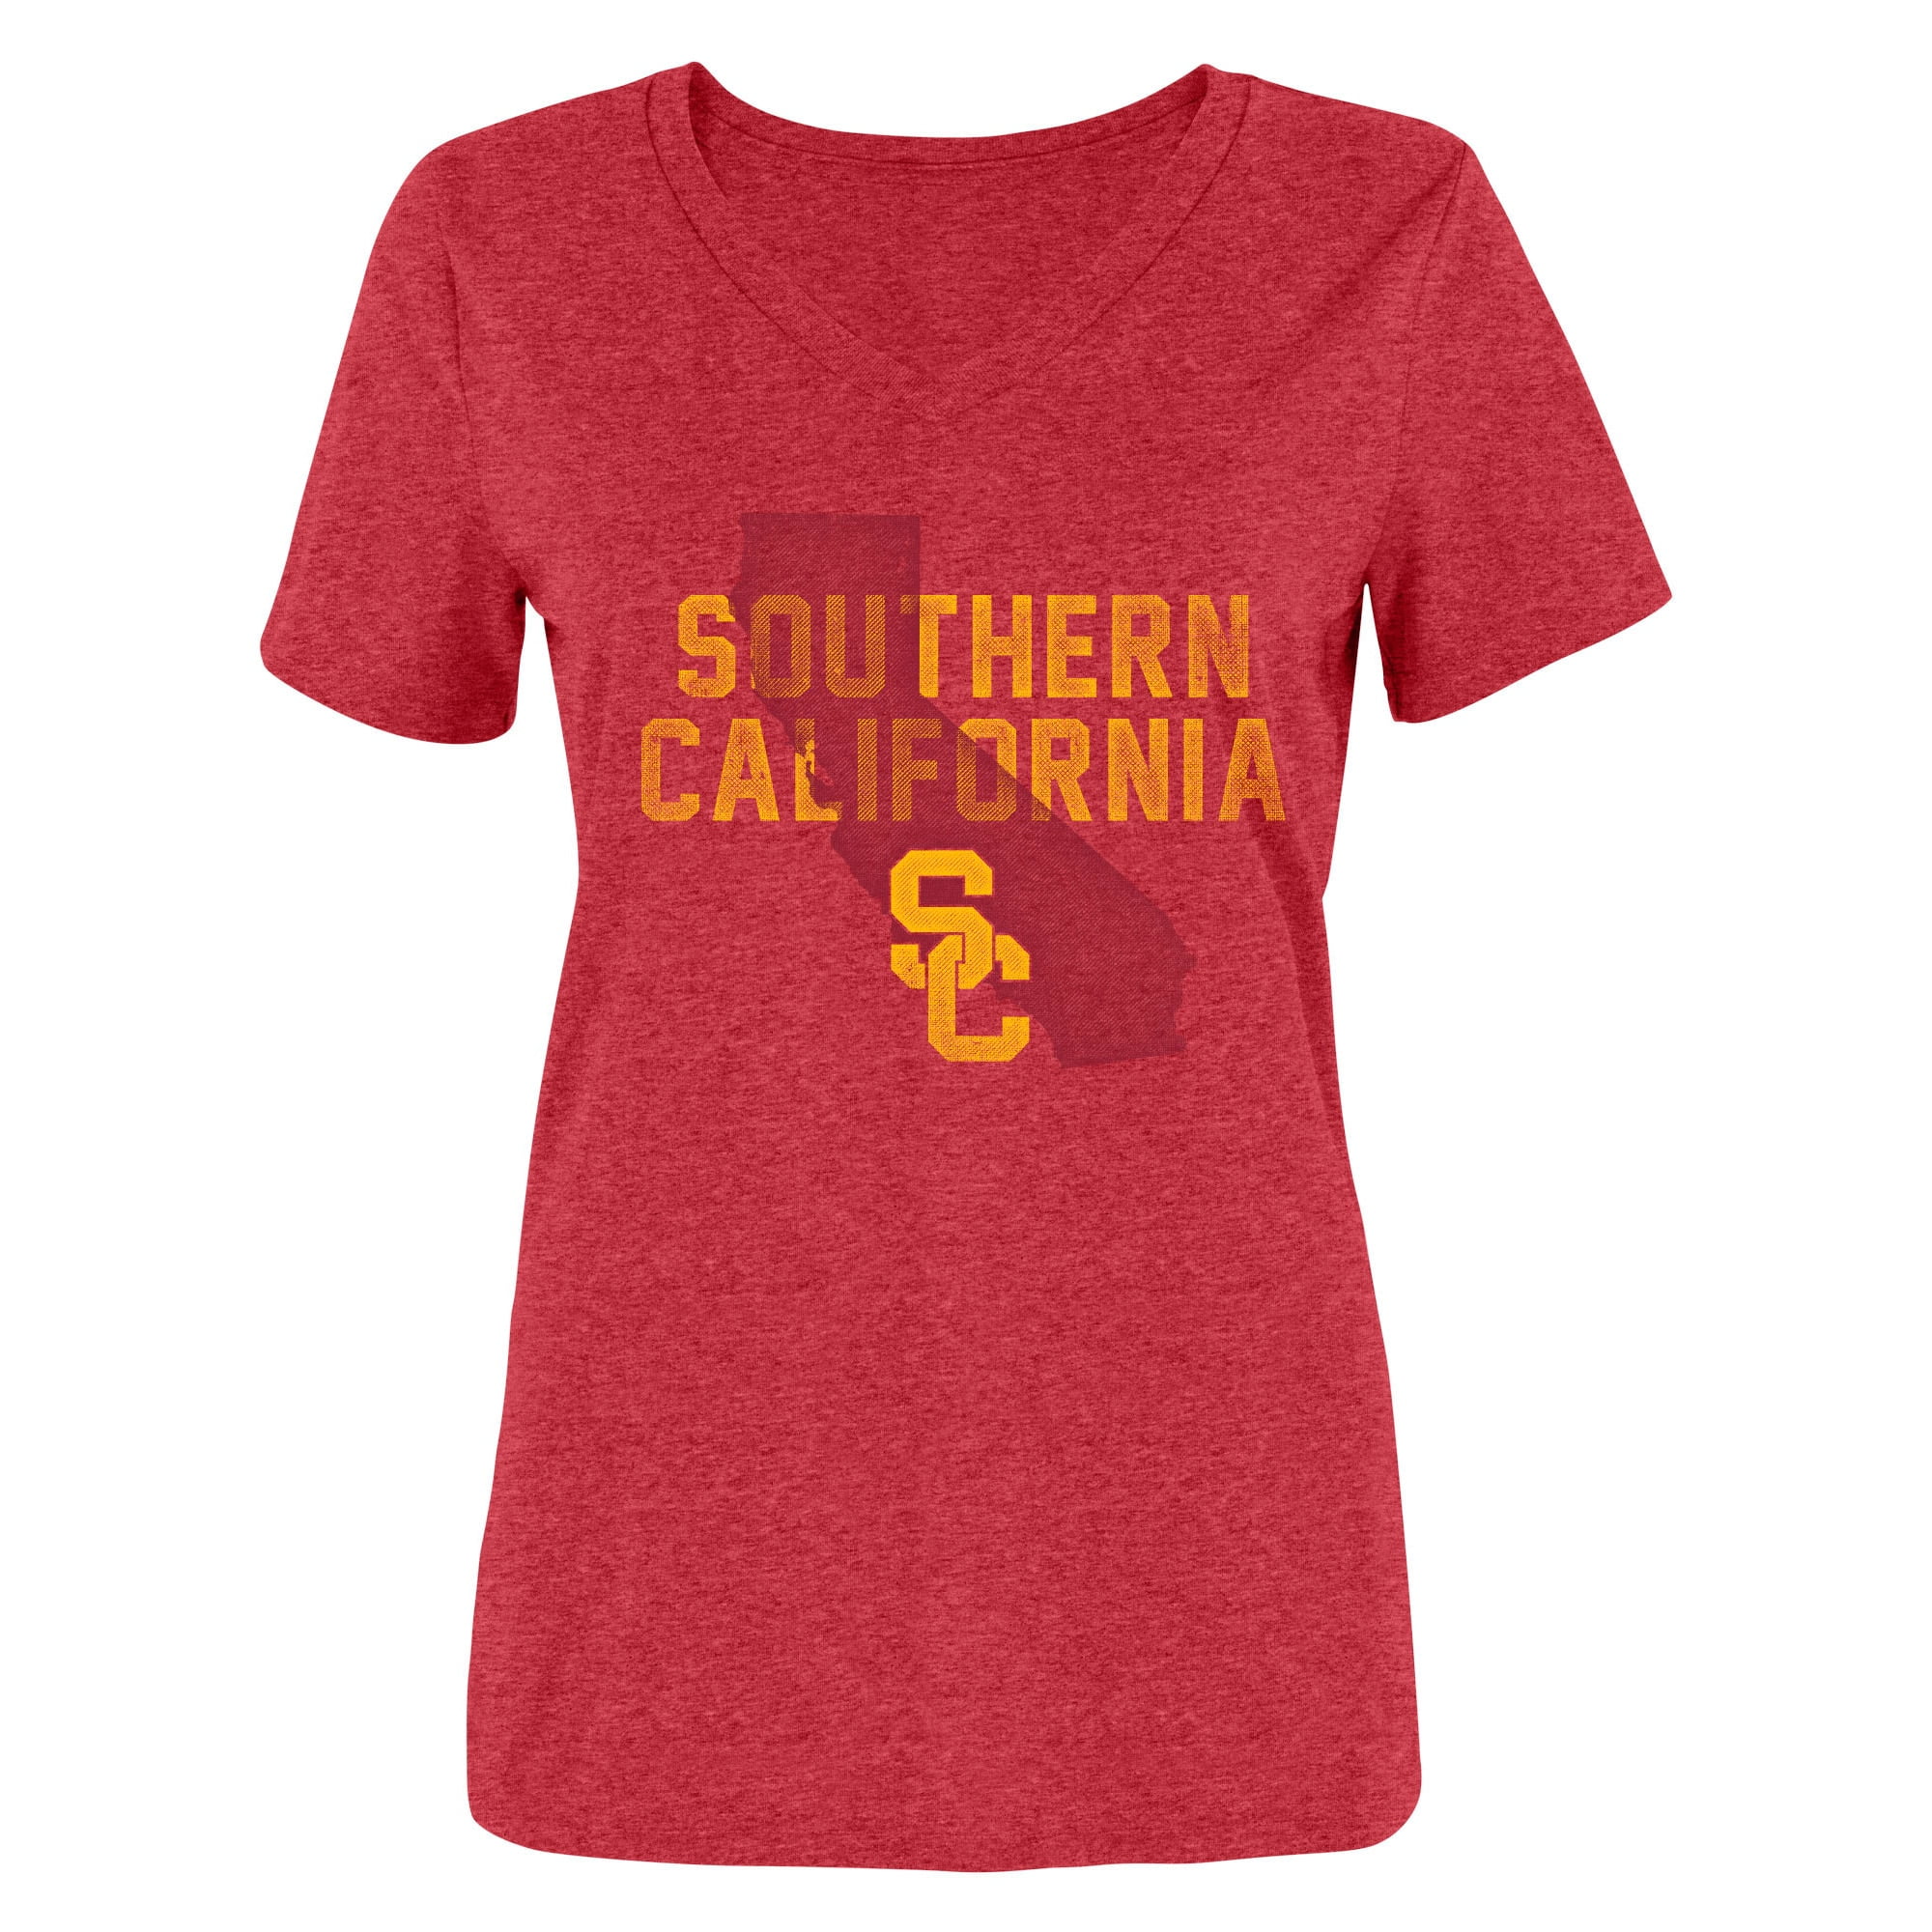 USC Trojans Men's Distressed Arched Crew Neck T-Shirt Cardinal Red 